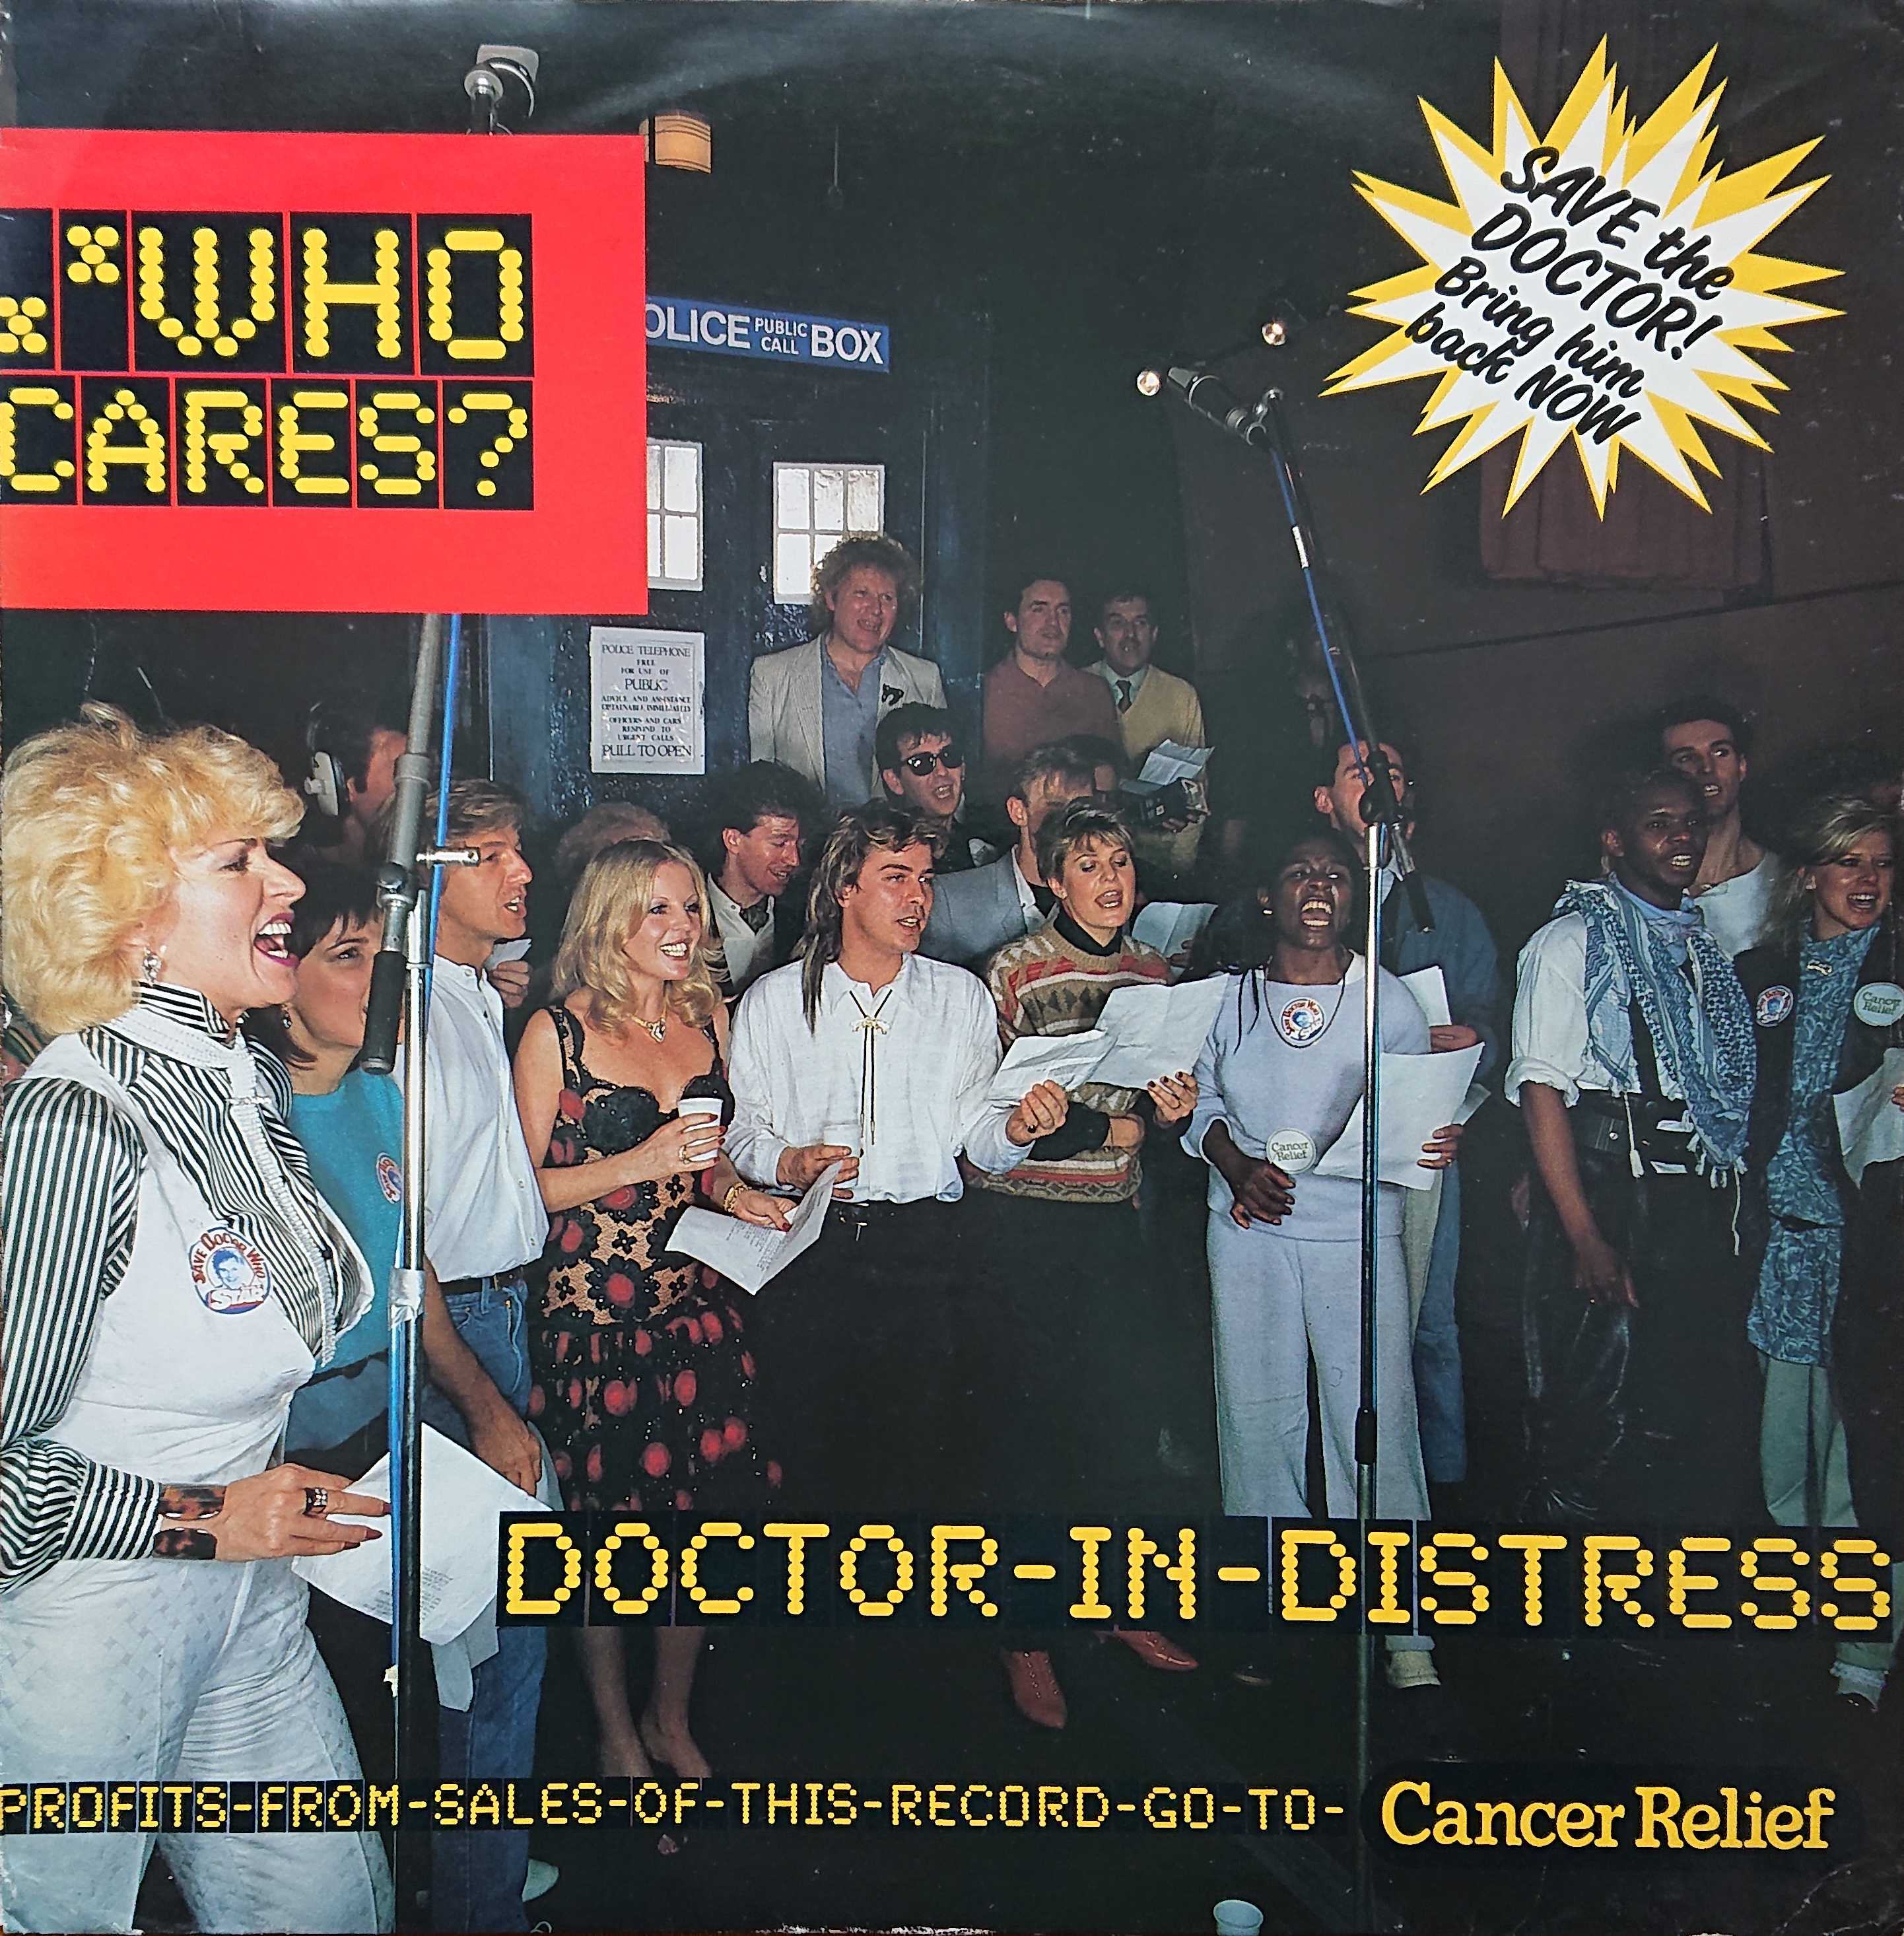 Picture of Doctor in distress by artist Ian Levine / Fiachra Trench / Who Cares from the BBC 12inches - Records and Tapes library